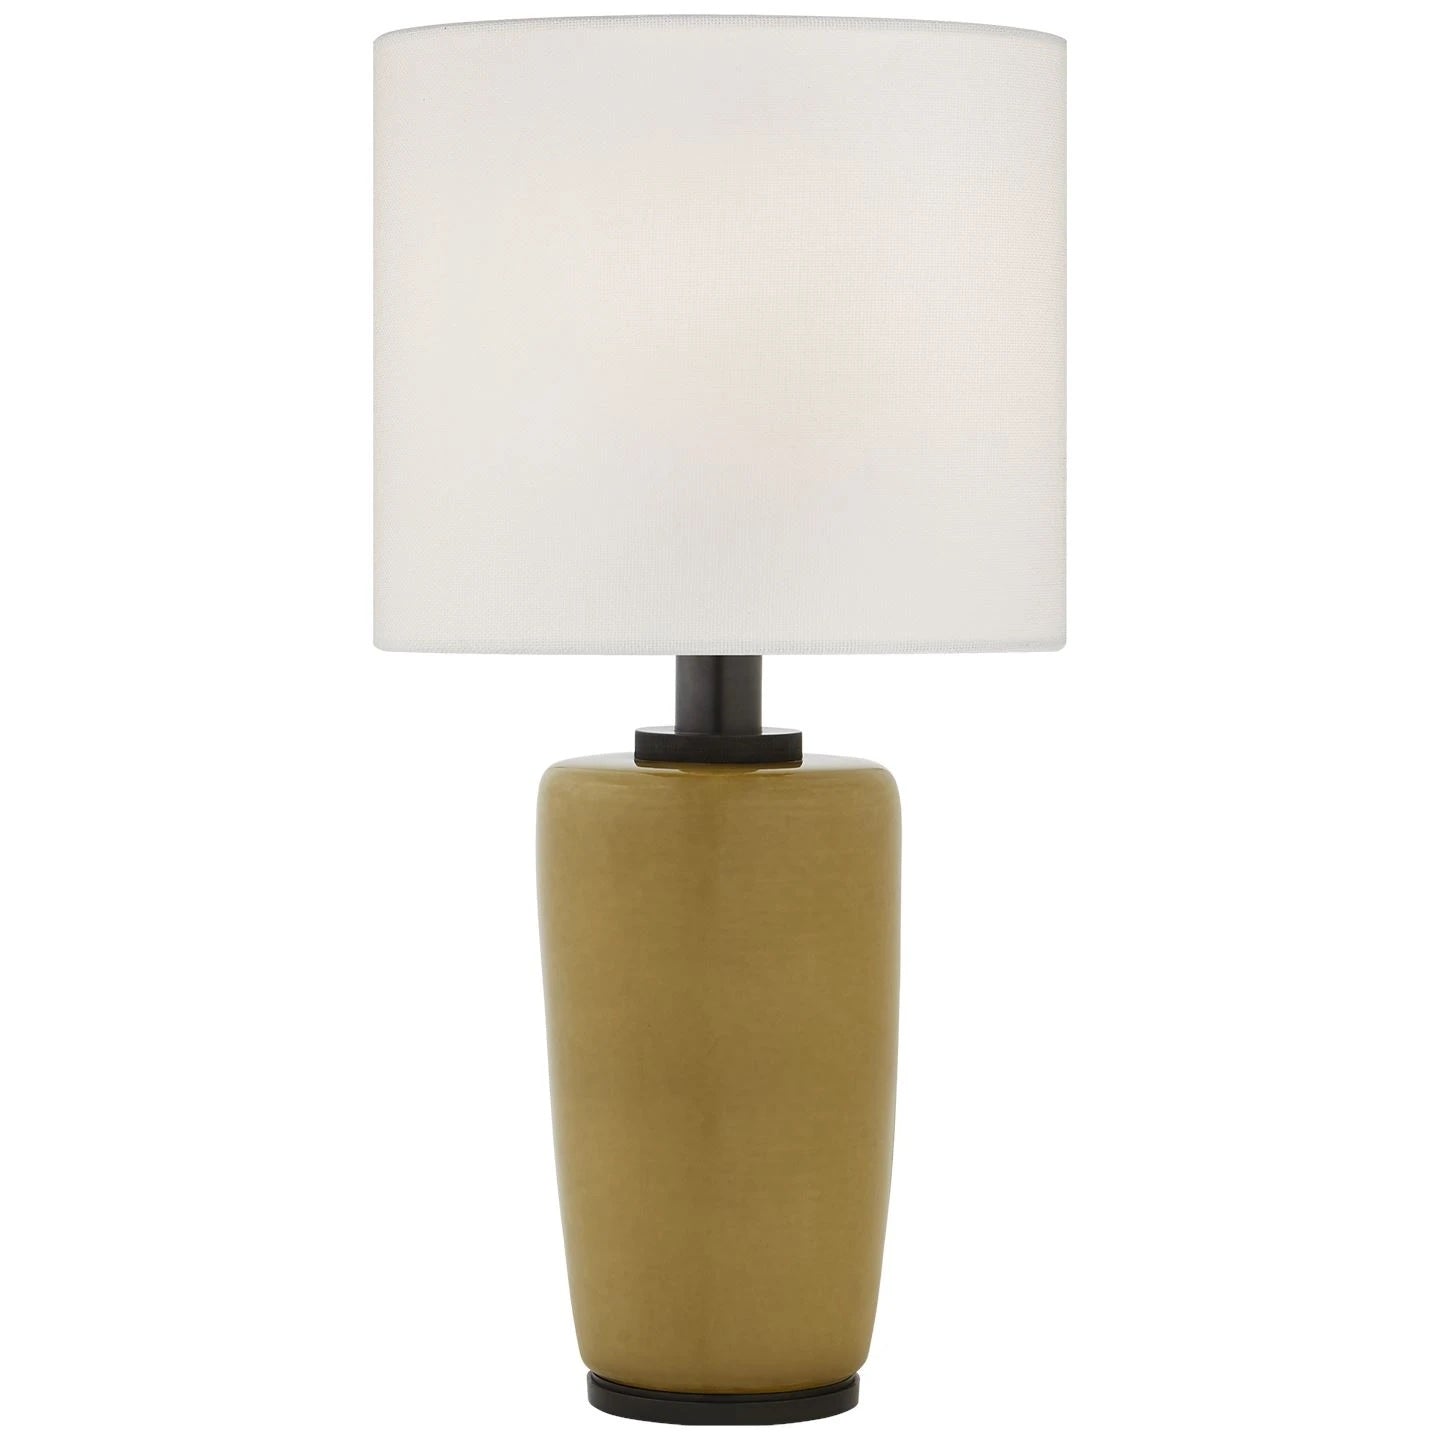 Chado Large Table Lamp in Dark Moss with Linen Shade 29"H